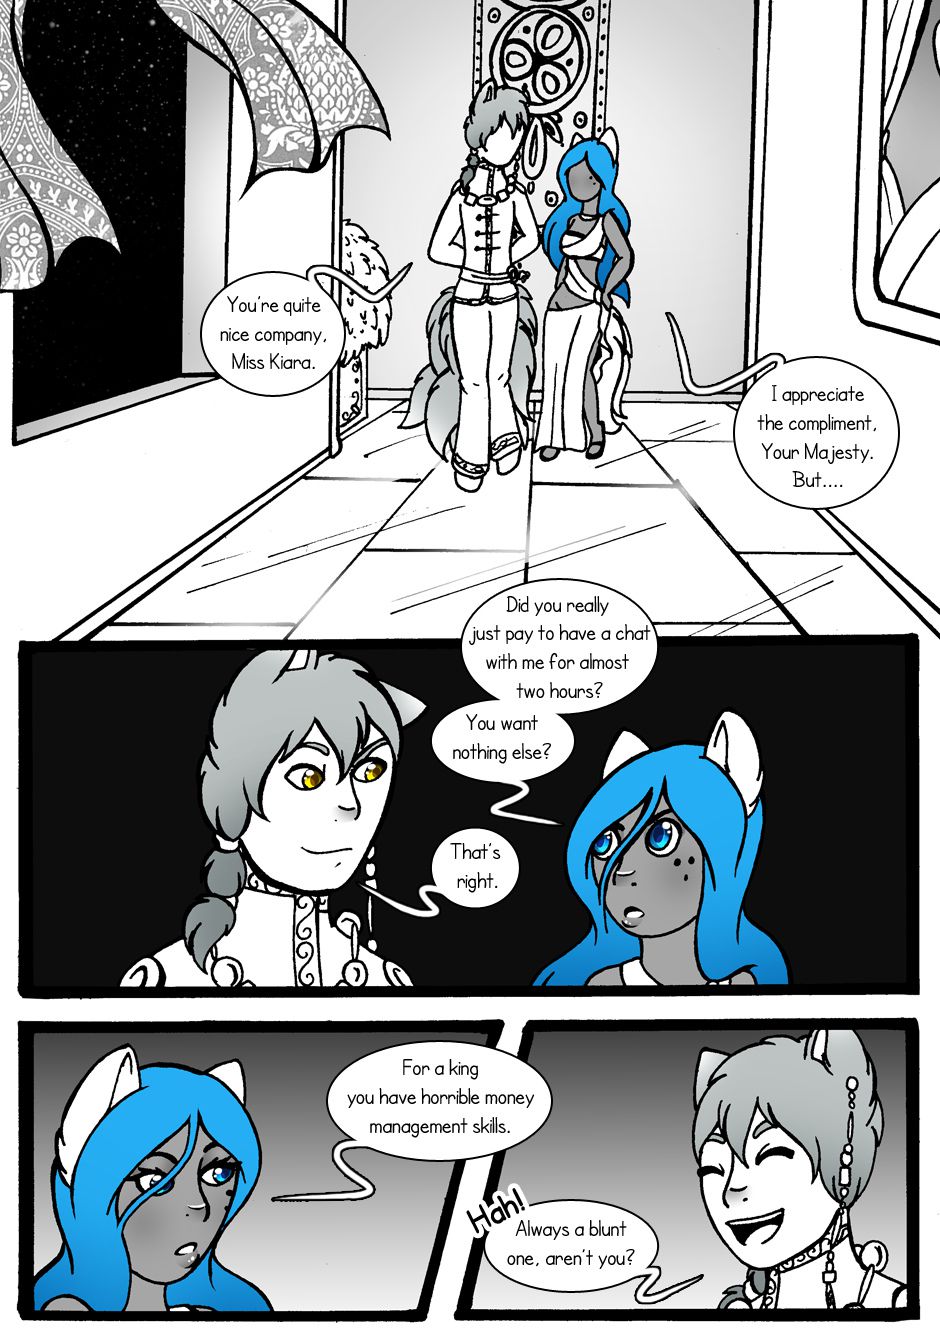 [Jeny-jen94]Between Kings and Queens[ongoing] 42